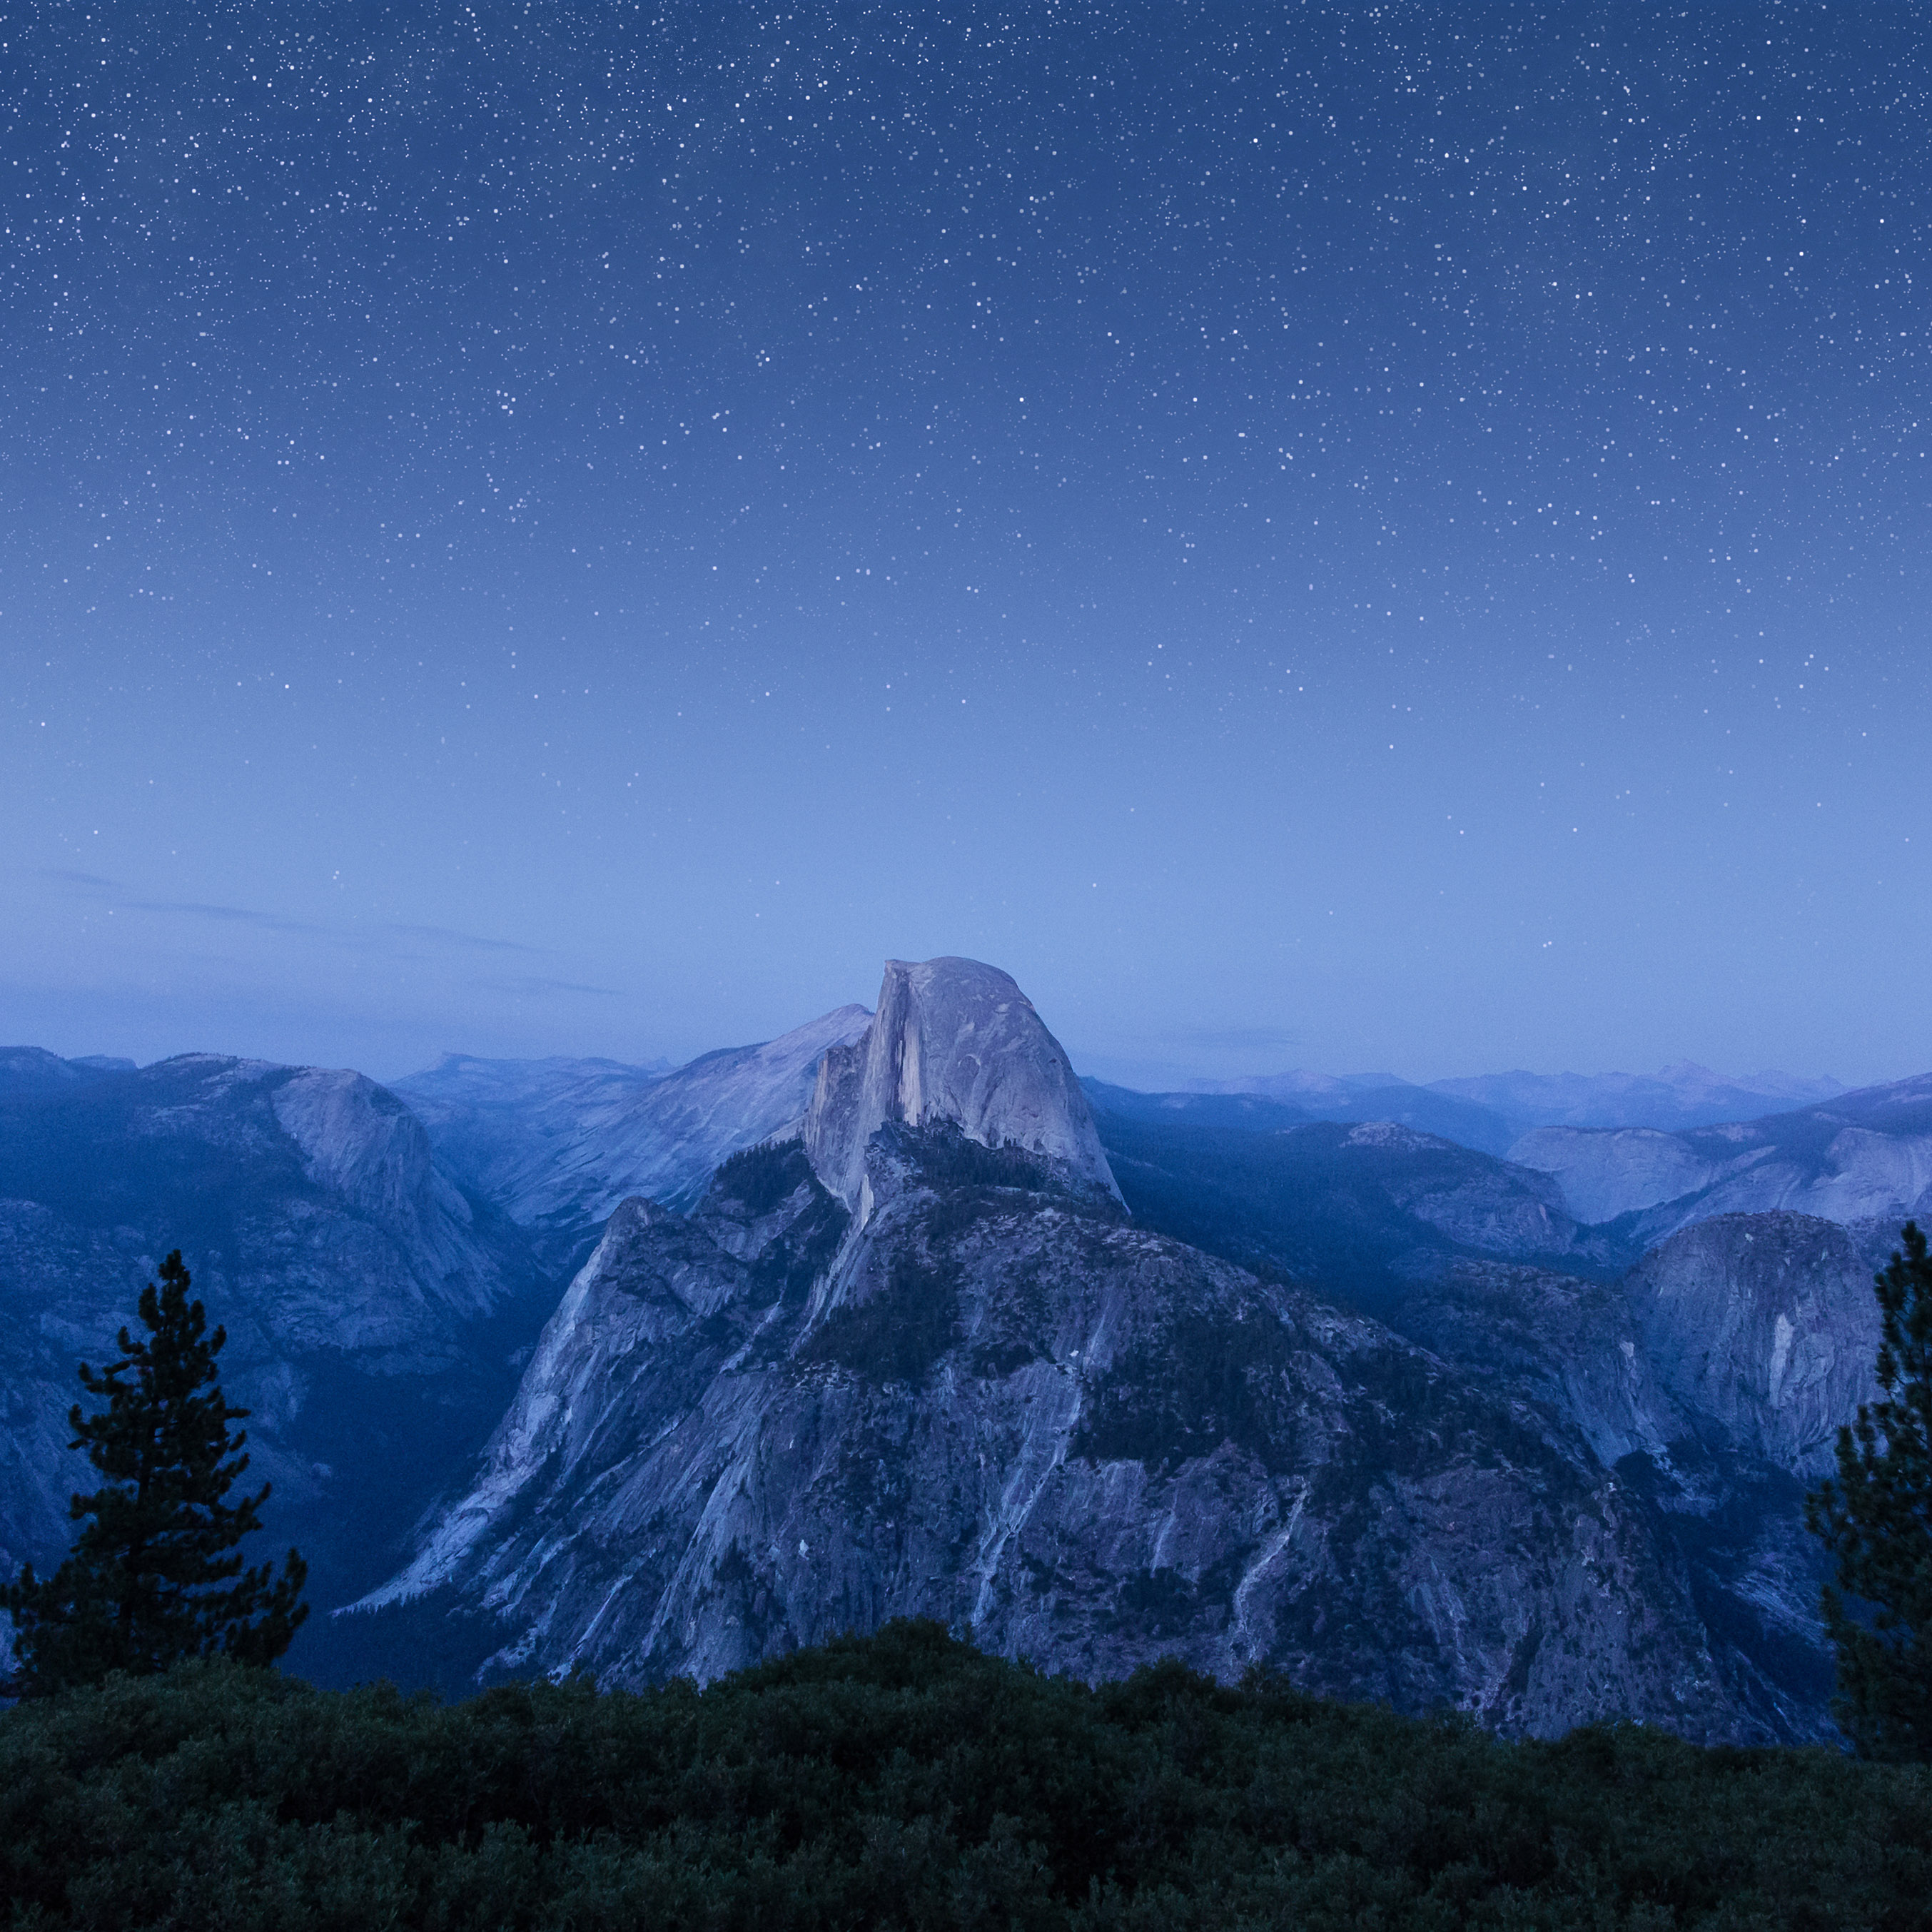 Download the New El Capitan Wallpapers for OS X and iOS - iClarified